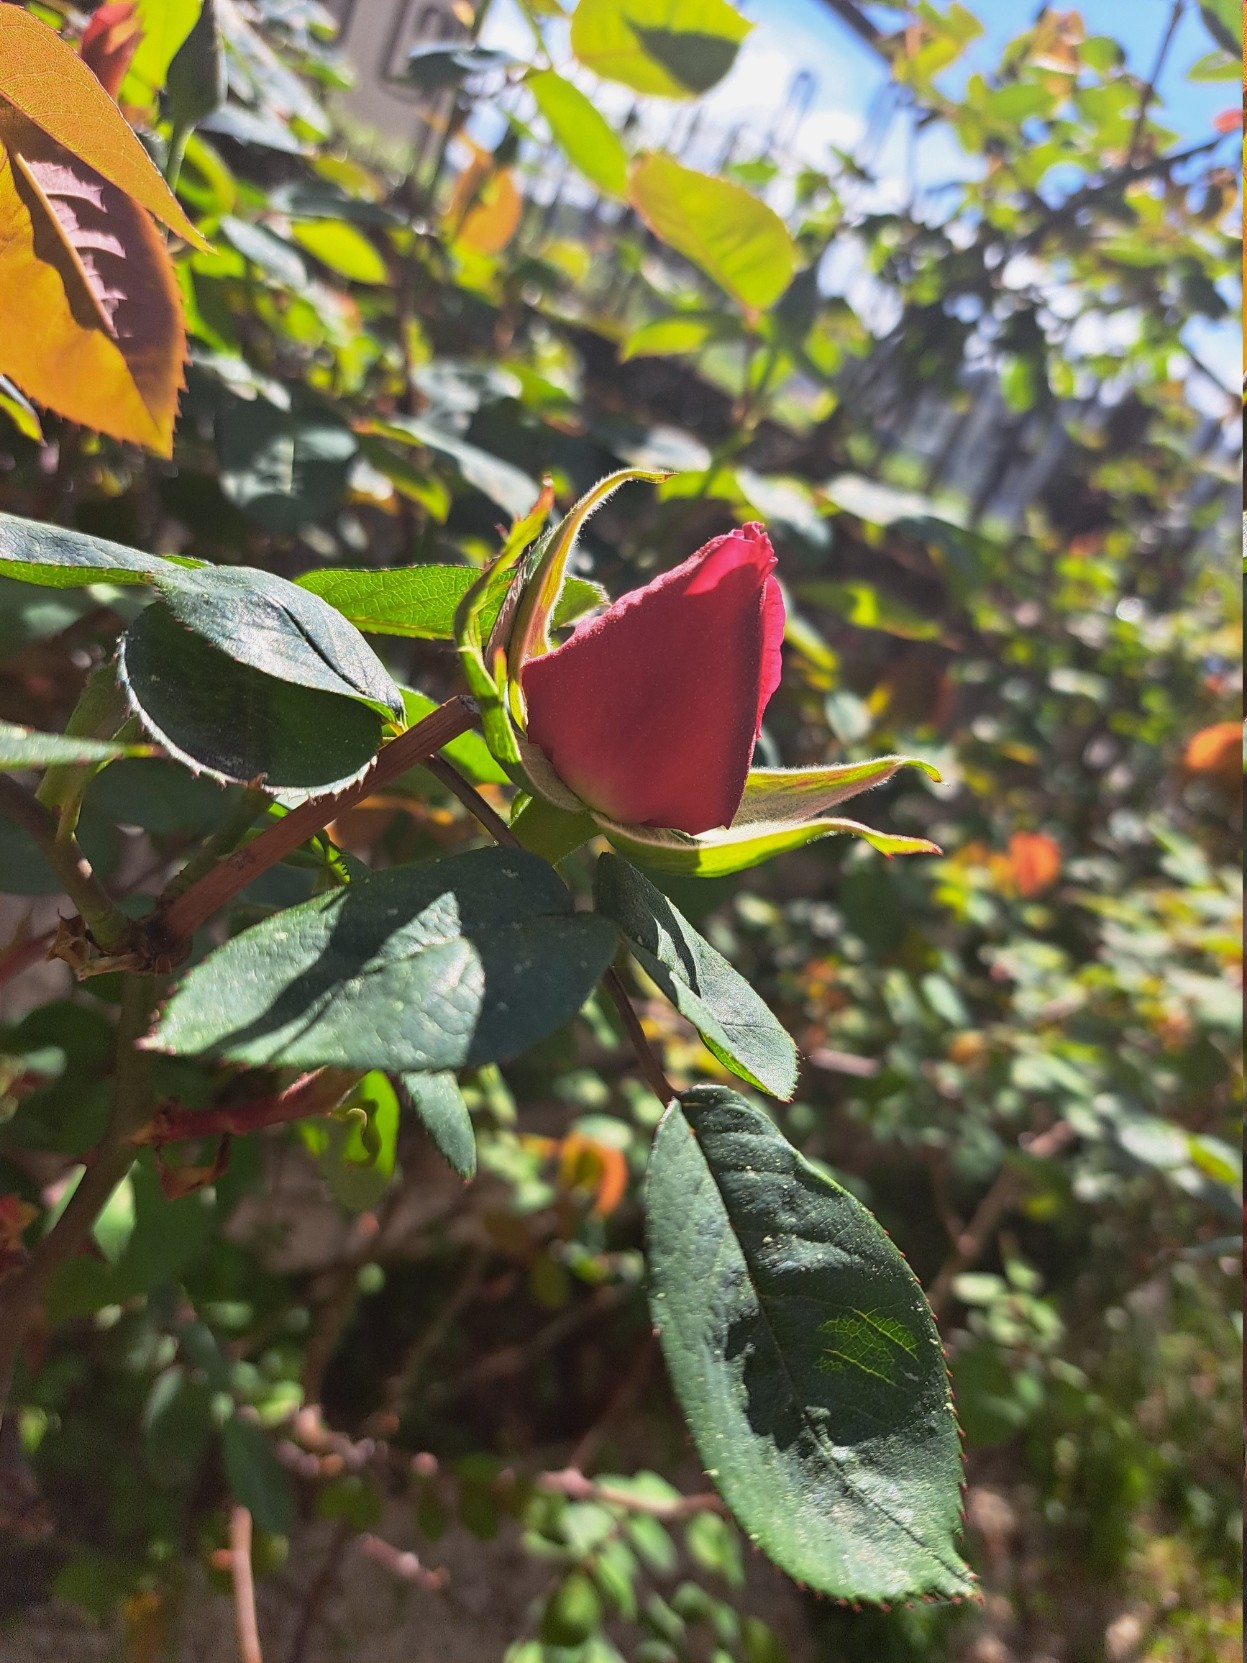 A pink rose button in the middle of leaves